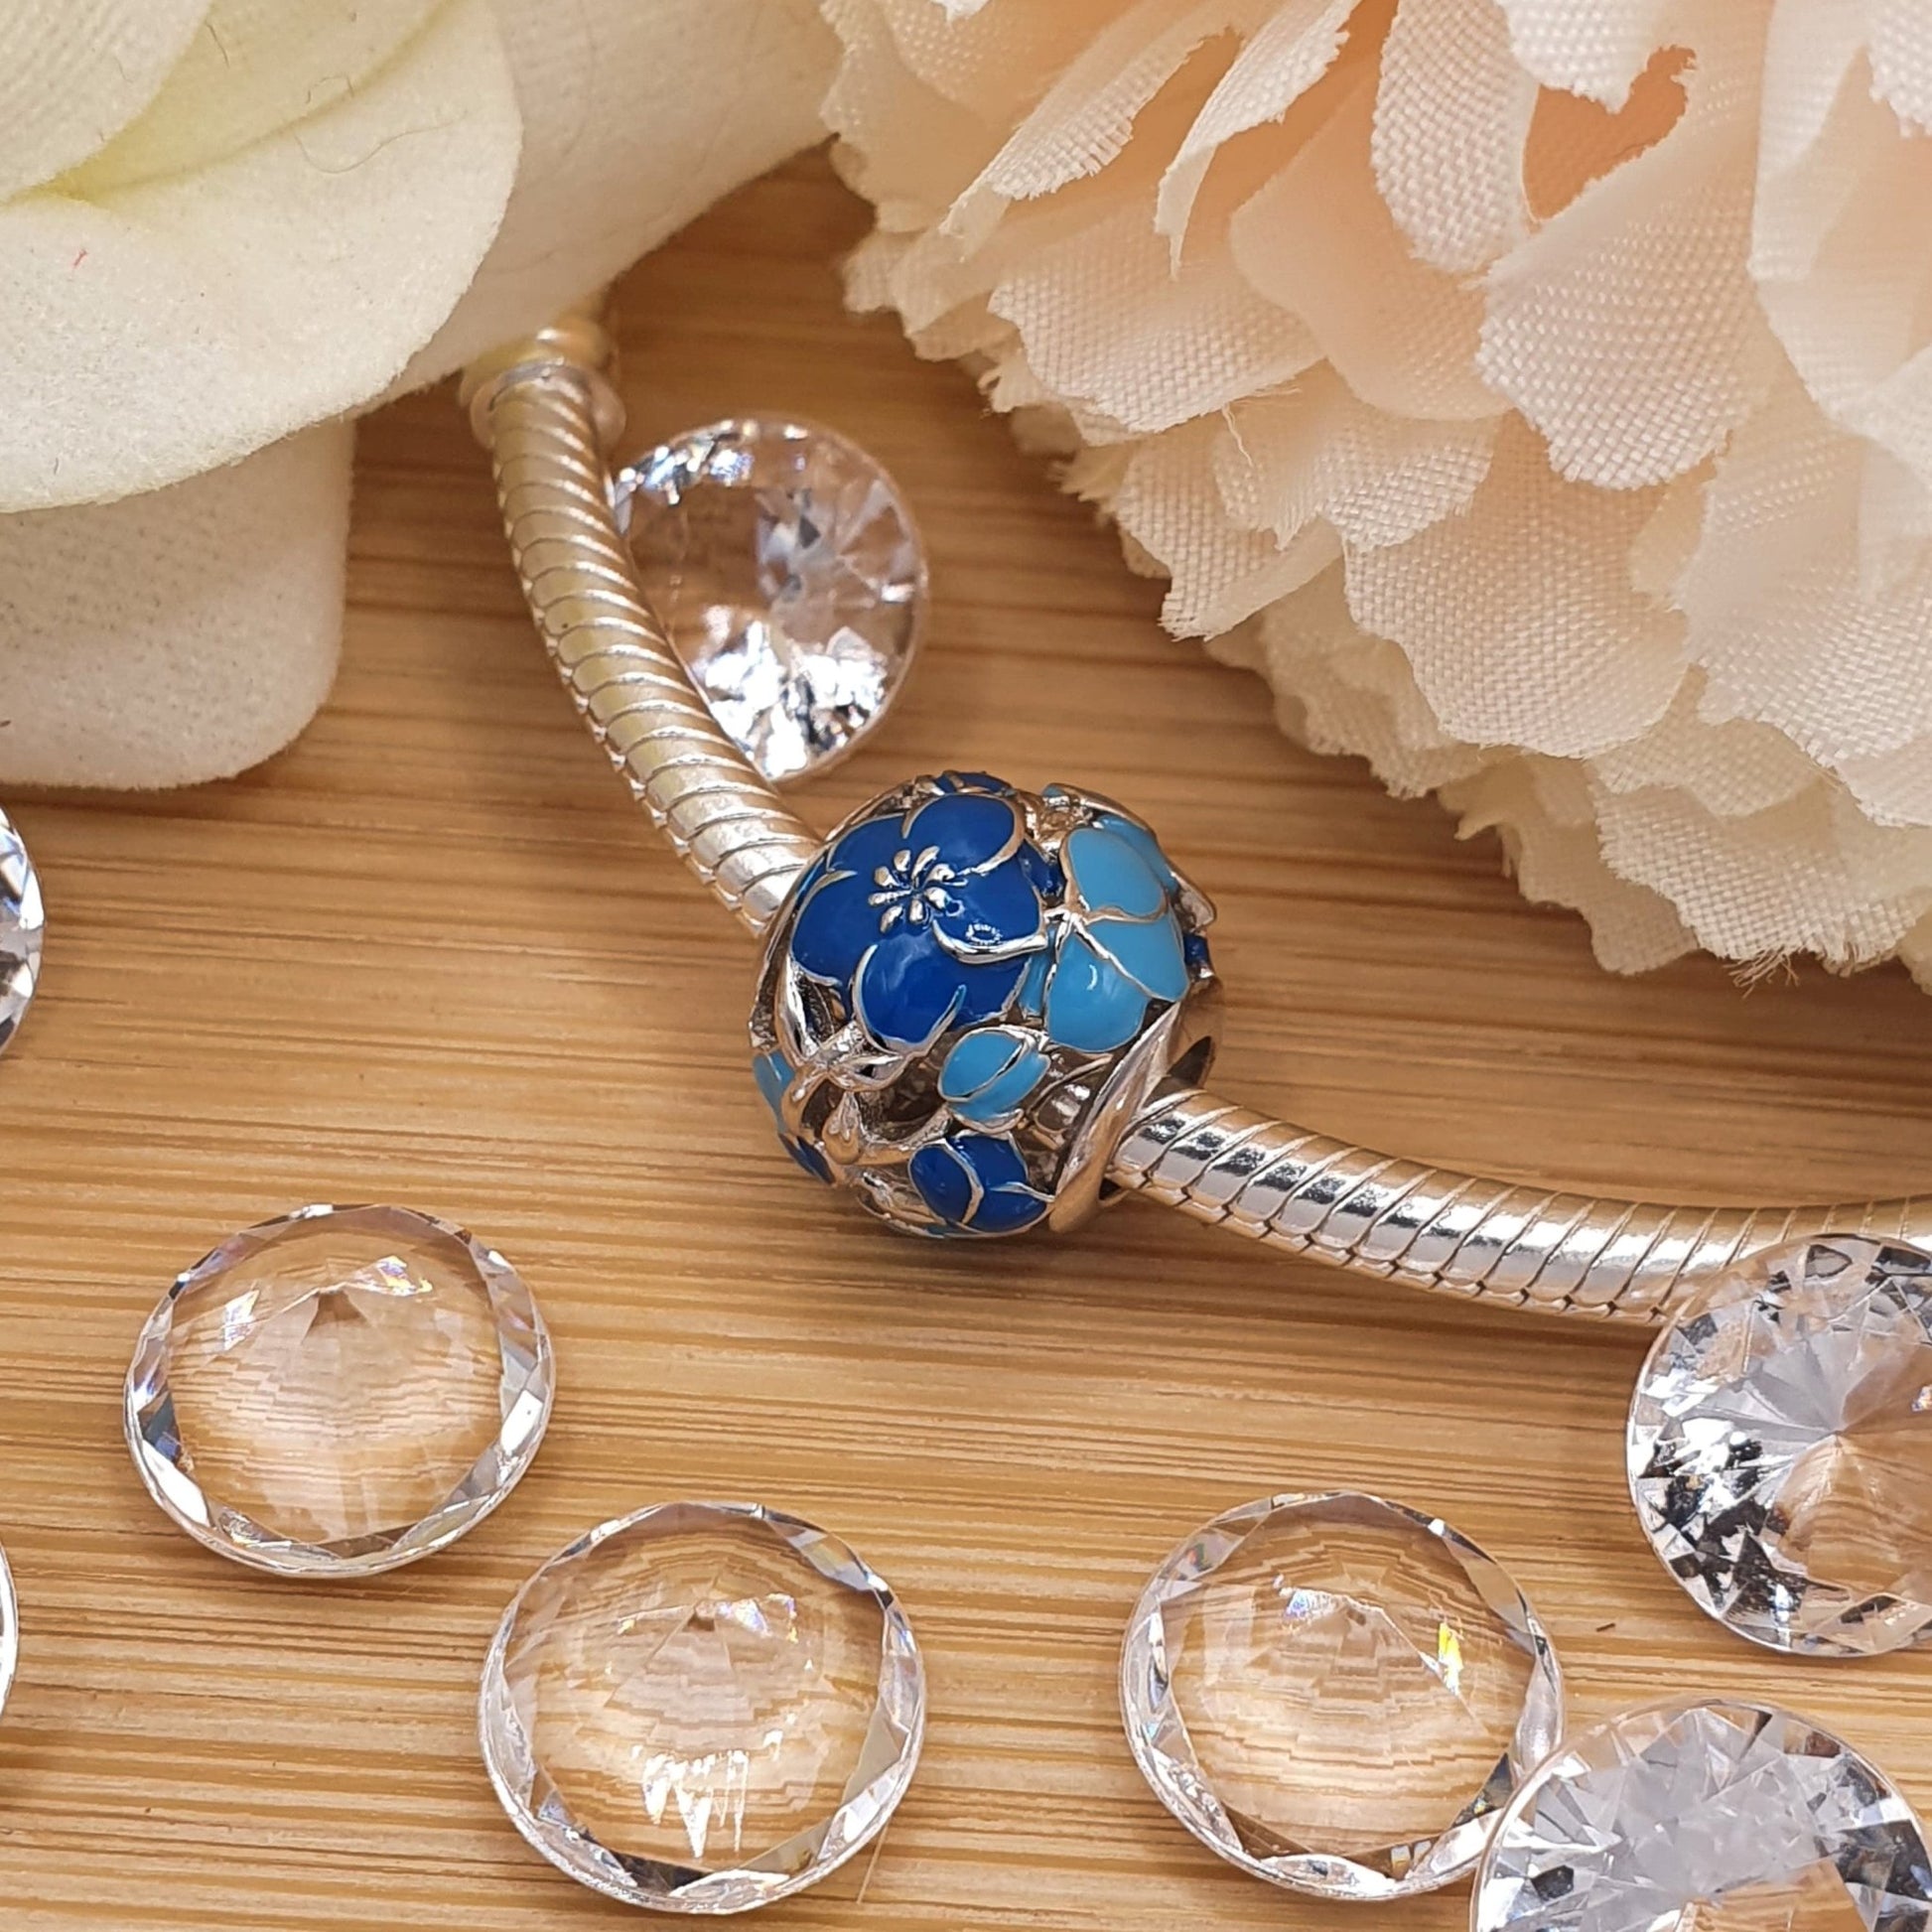 Forget Me Not Charm (Alzheimer's) - The Bee Charm